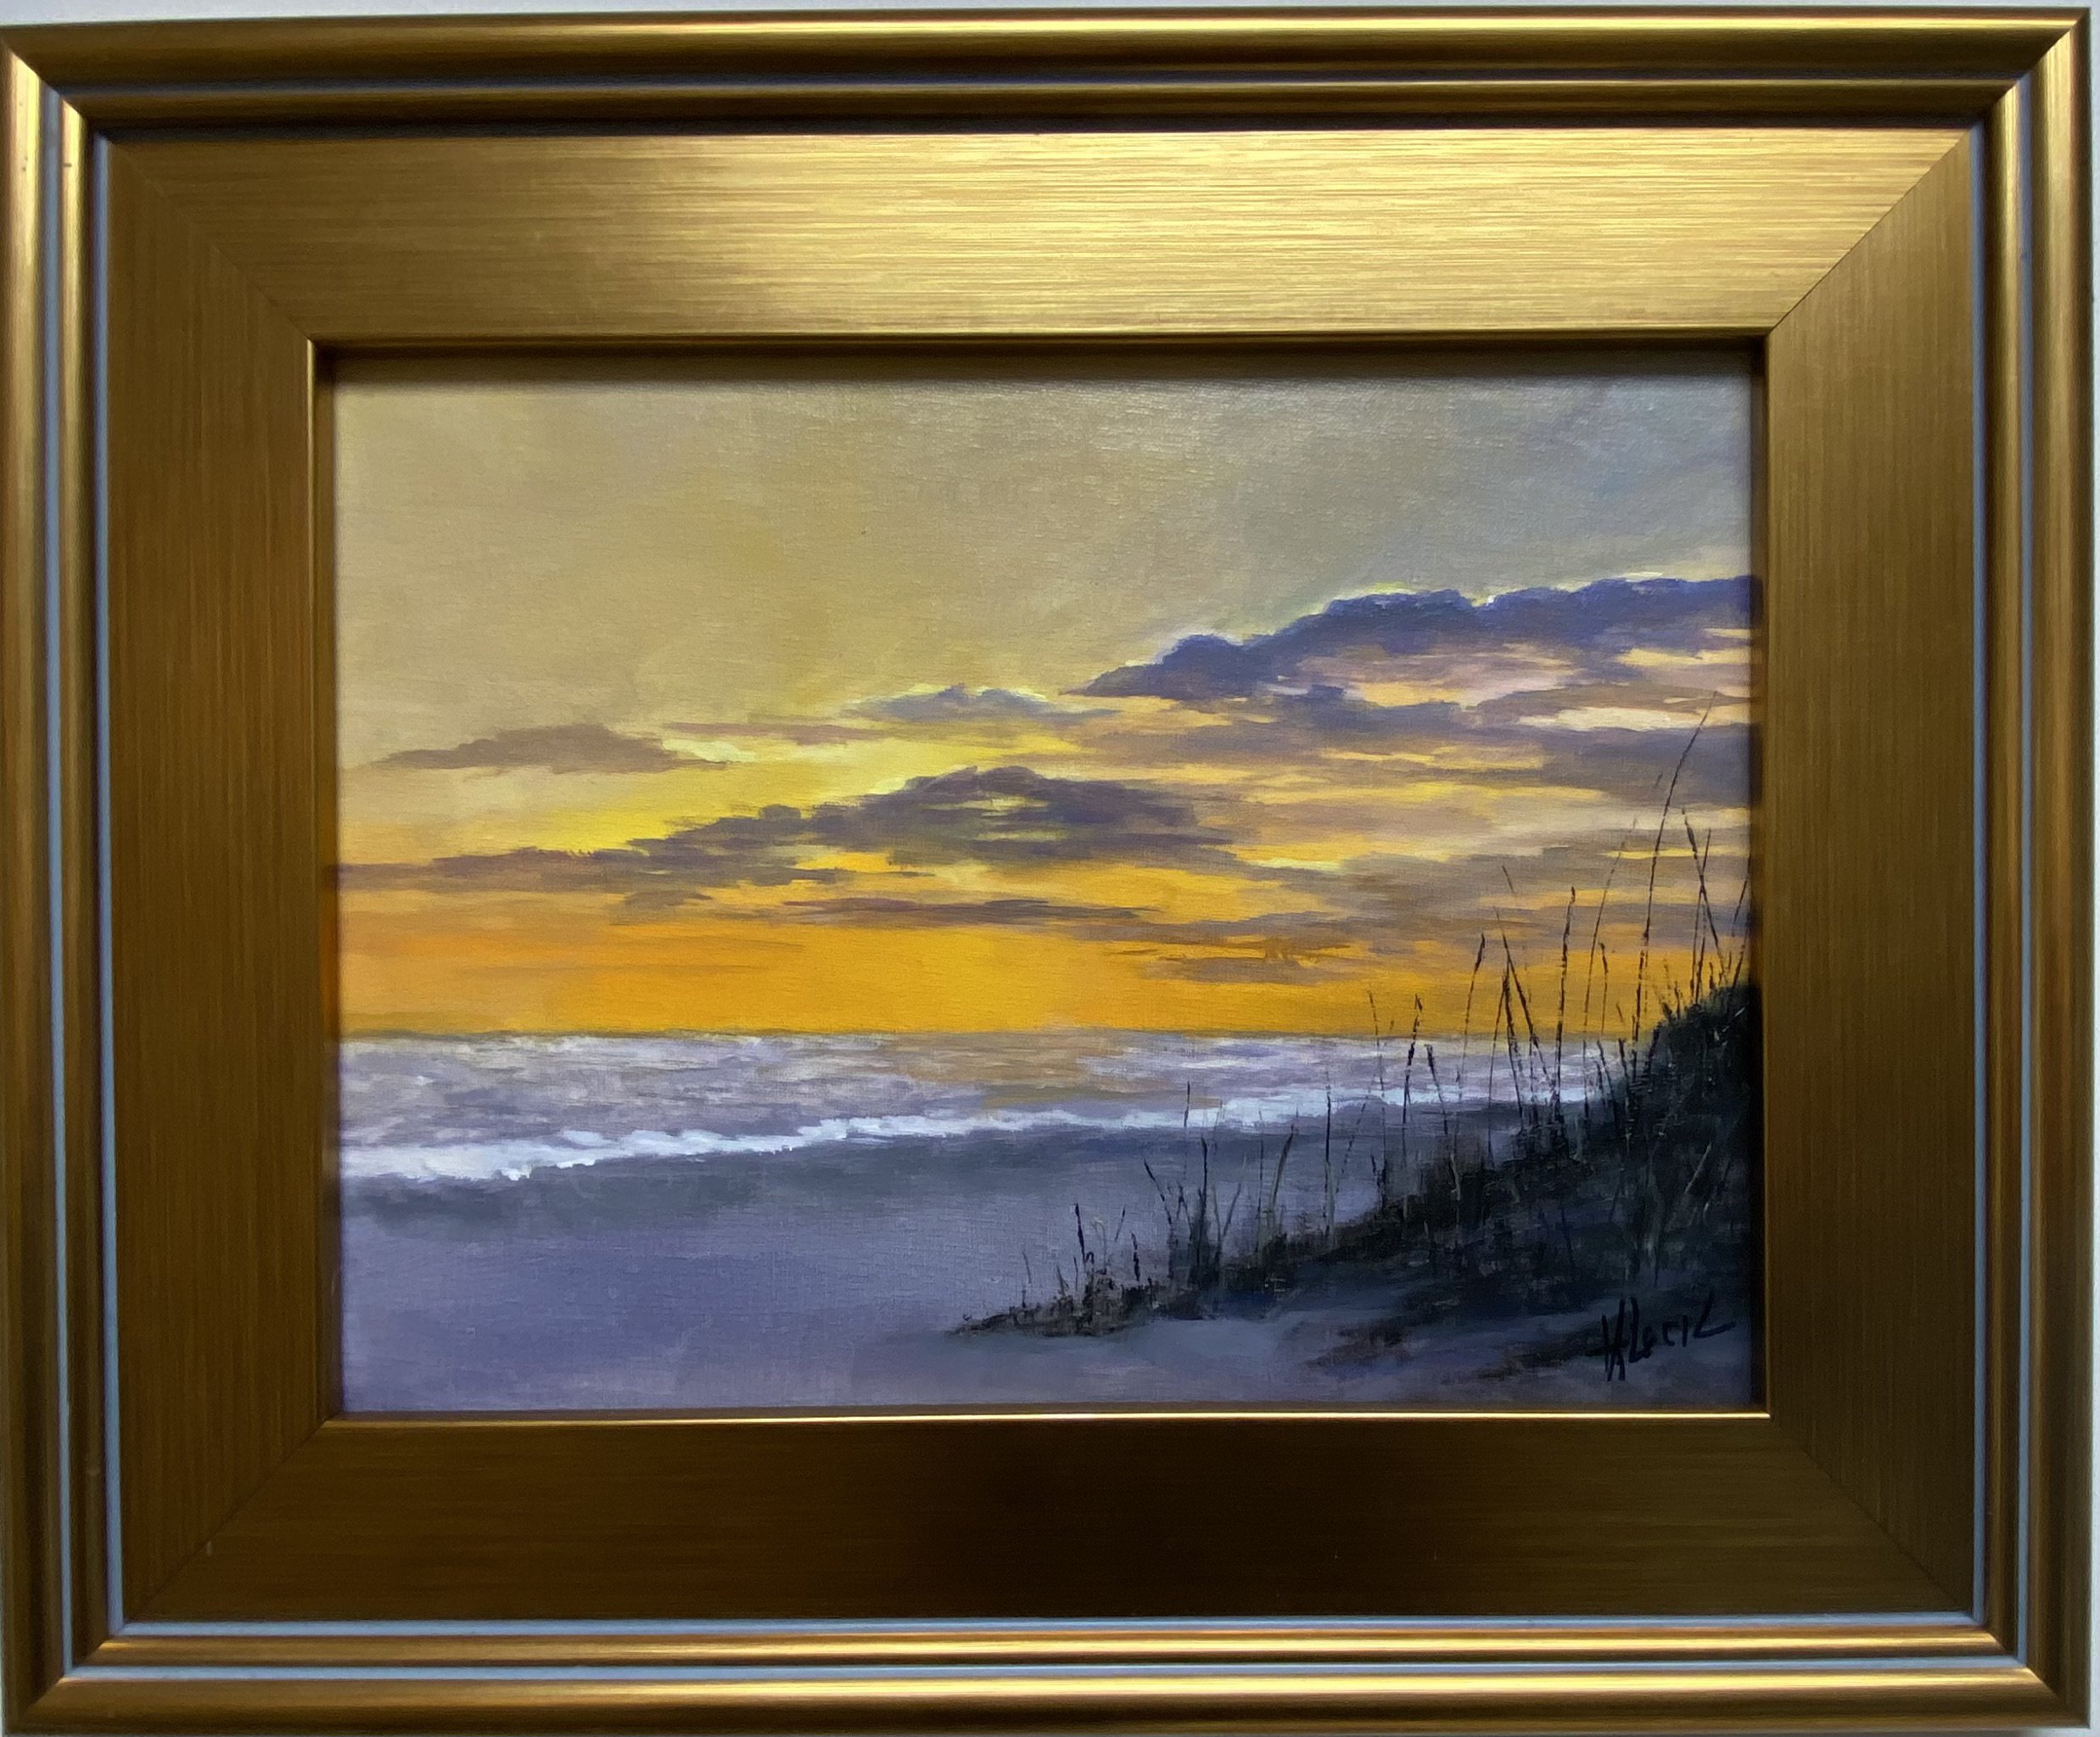 Dramatic sunset over the gulf with beach grasses silhouetted against the sky in Henry Leck's painting.